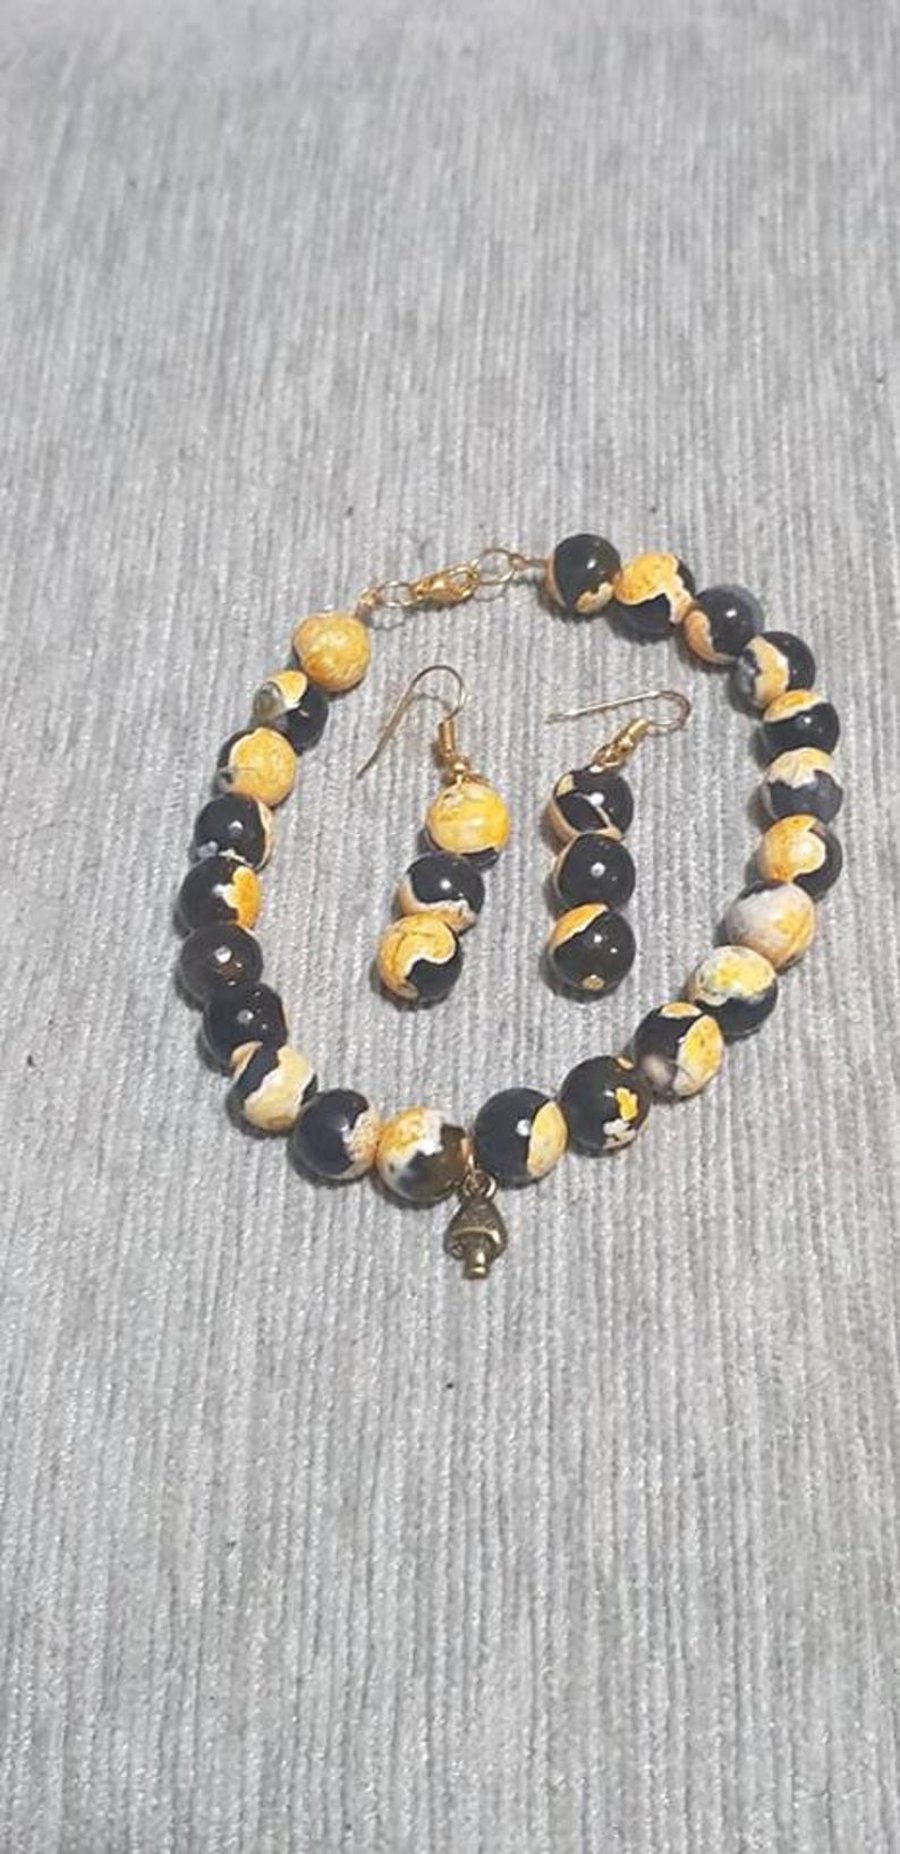 Natural Grade A Goldenrod Agate Jewellery Set with Mushroom Charm